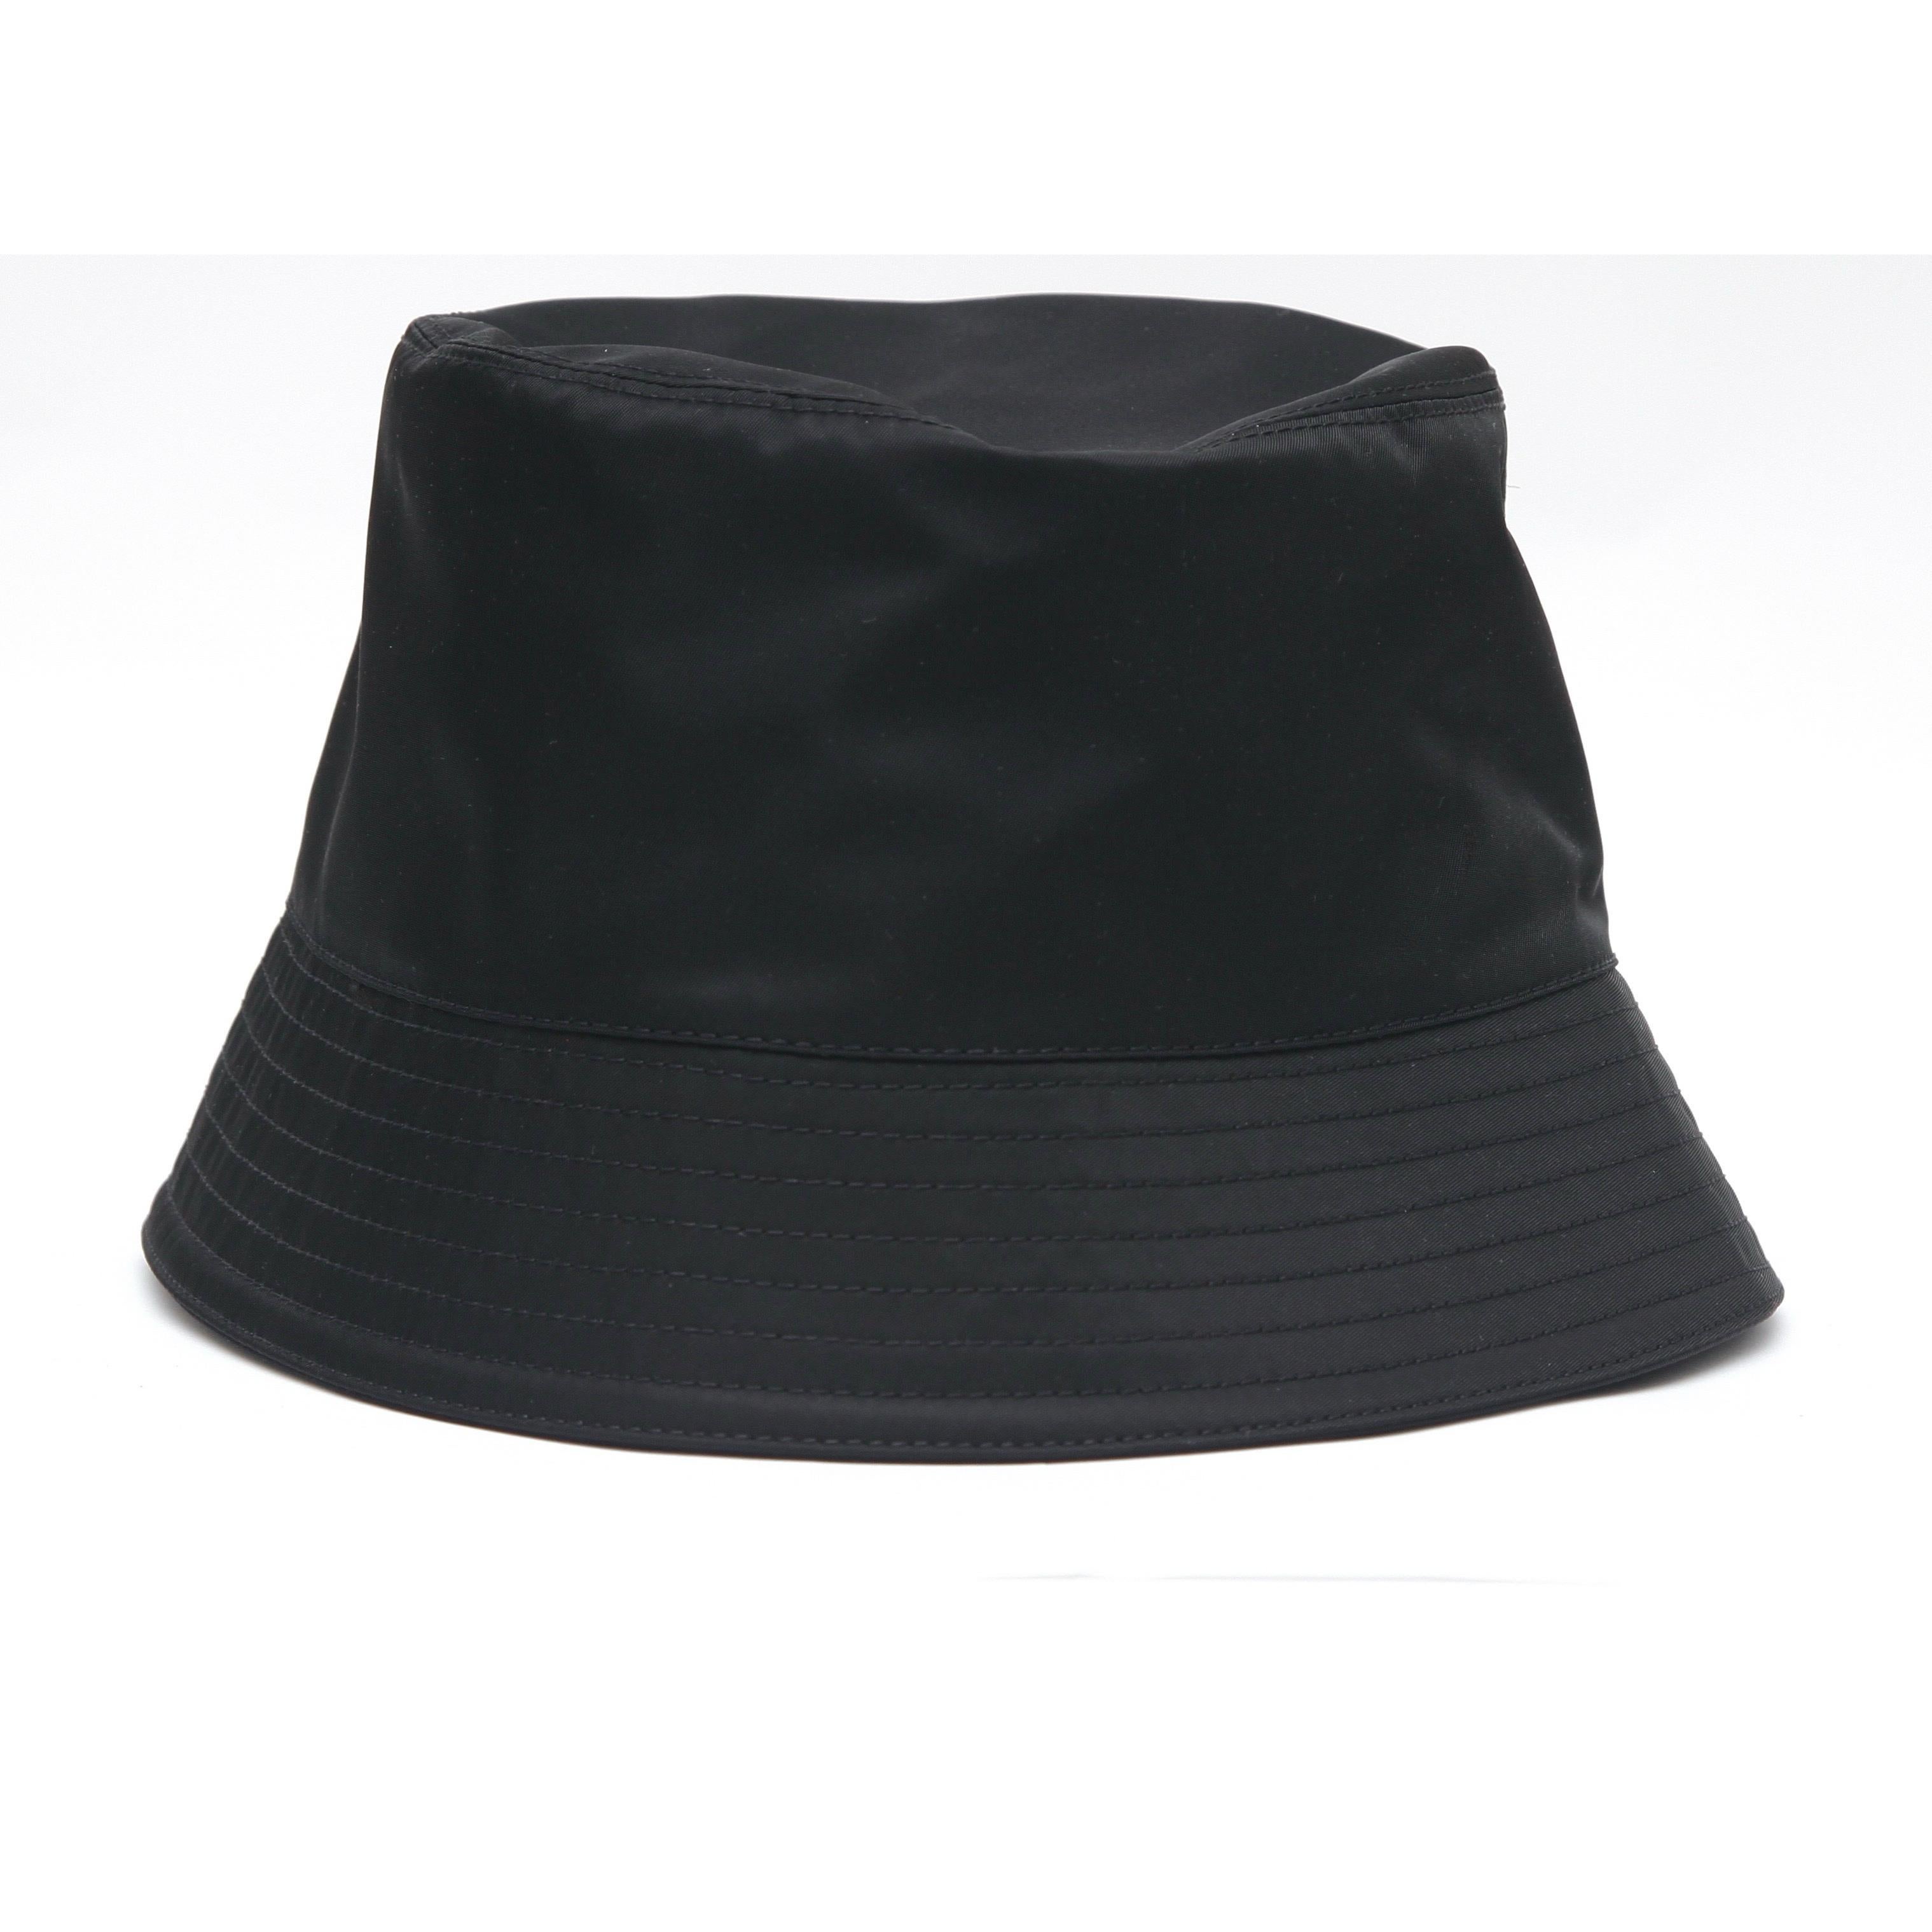 GUARANTEED AUTHENTIC PRADA BLACK RE-NYLON BUCKET HAT

Excluding sales taxes, $695

Design:
• Black re-nylon.
• Enameled metal triangle logo.
• Brim.
• Comes with Prada dust bag, product cards.

Material: 100% Re-Nylon, Lining Cotton

Size: M

To Our